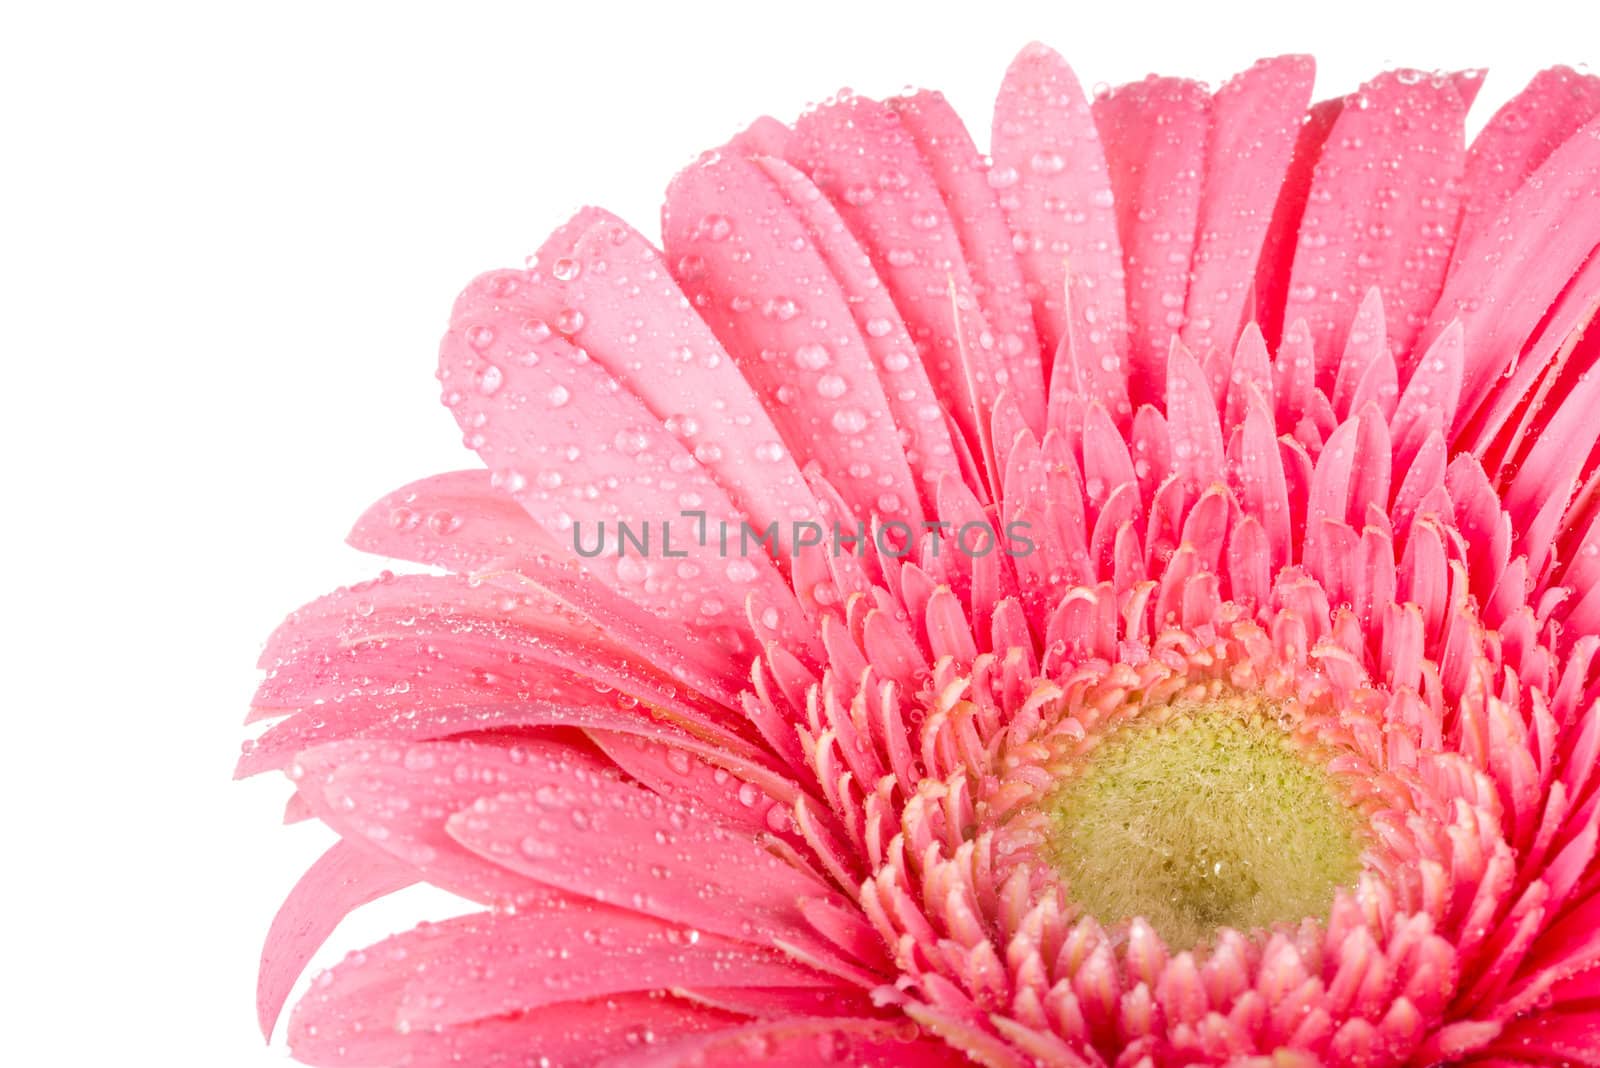 close-up pink gerbera with drops of water, isolated on white